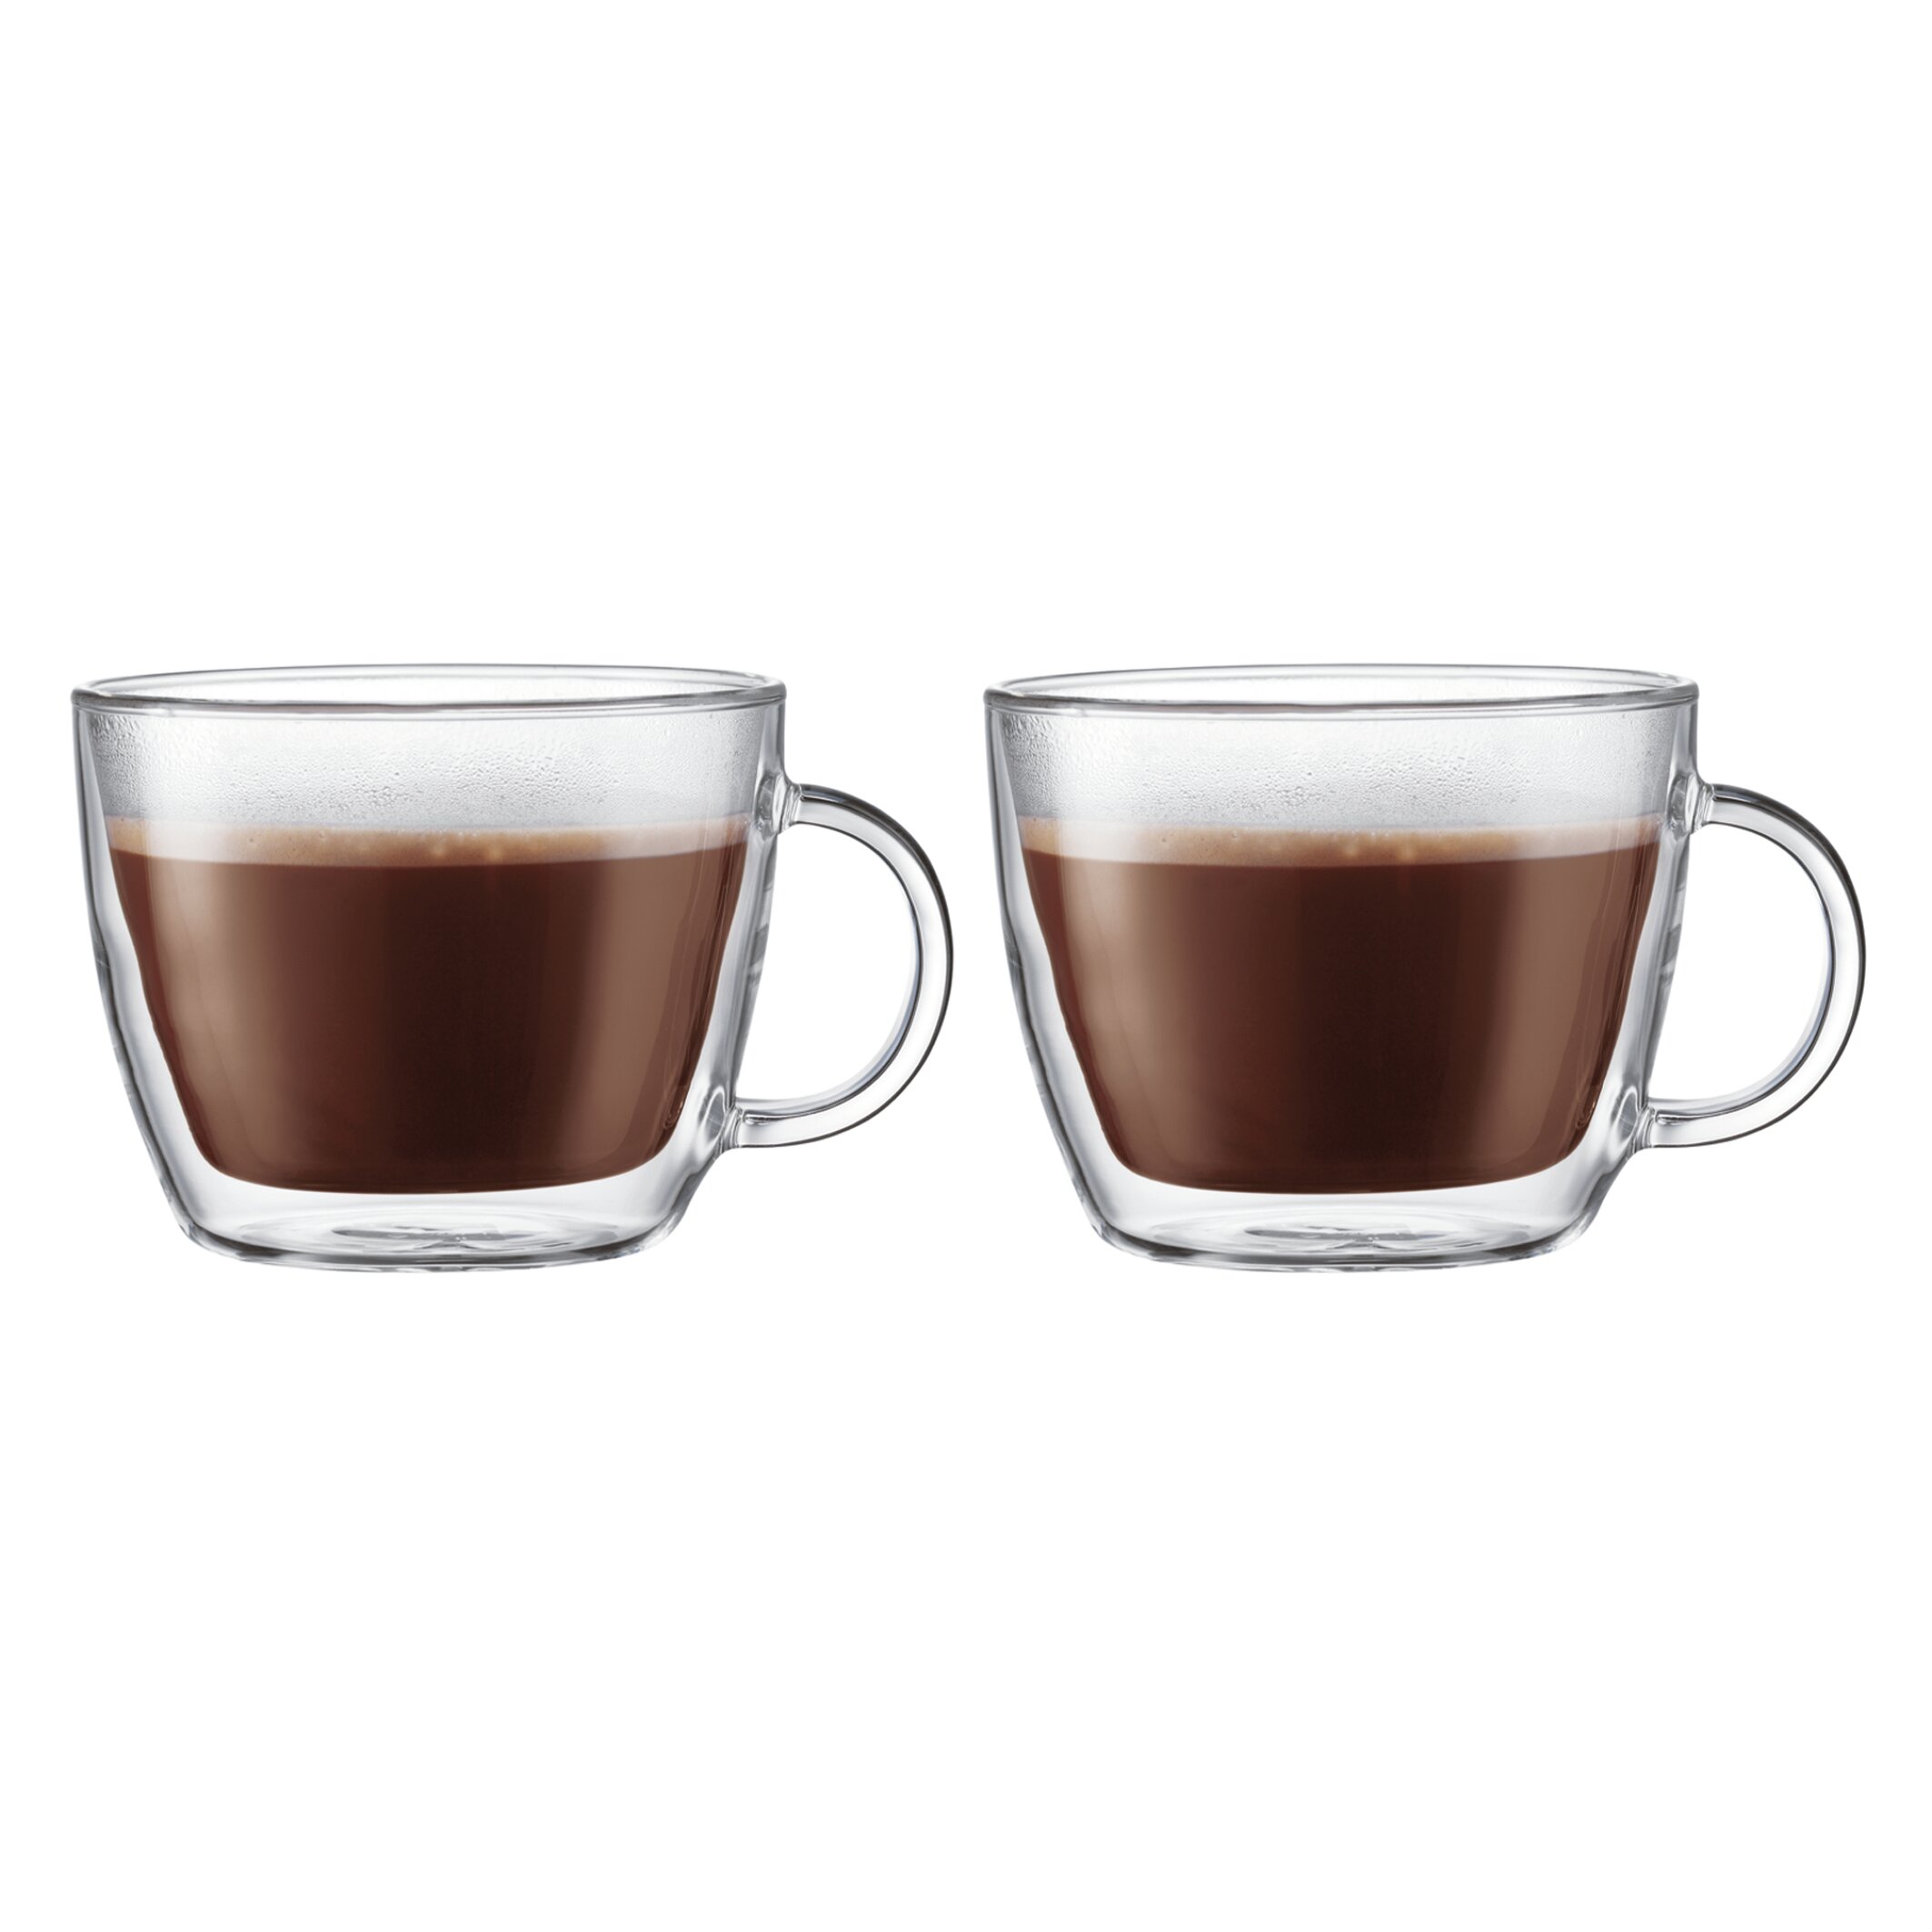 ESPRESSO DOUBLE WALLED COFFEE CUP 4 GLASSES & 4 SPOONS FOR BODUM CAPPUCCINO 